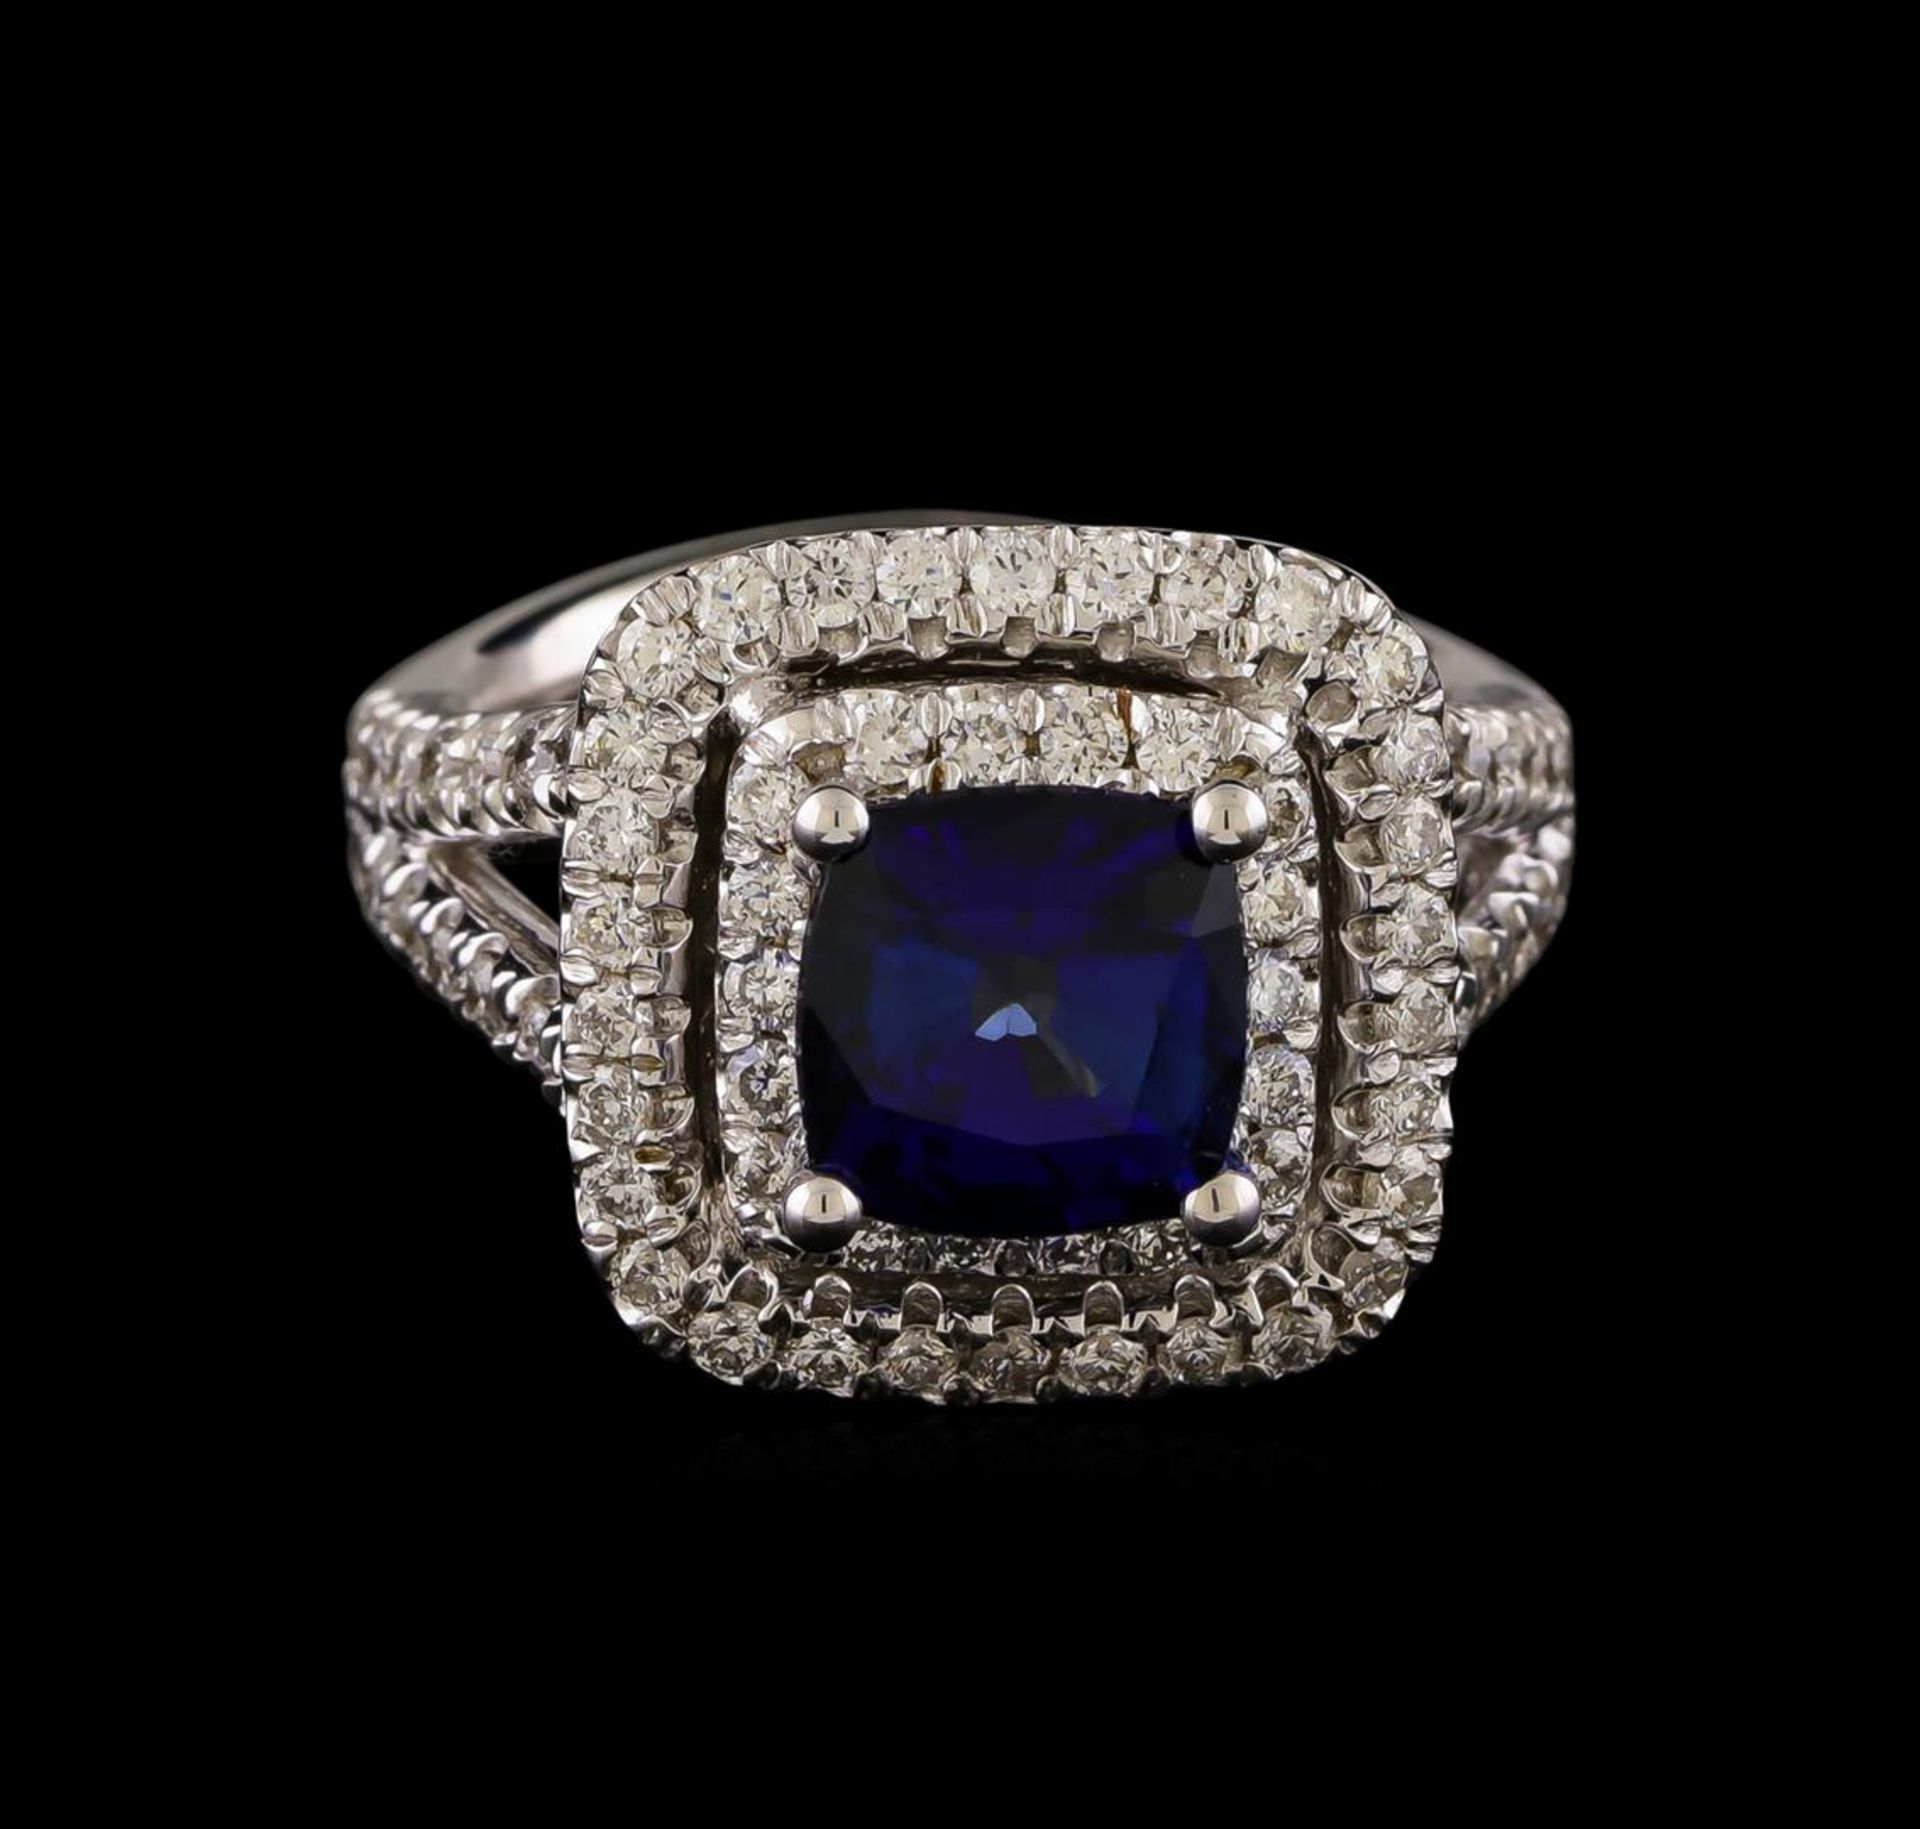 14KT White Gold 2.72 ctw Sapphire and Diamond Ring - Image 2 of 5